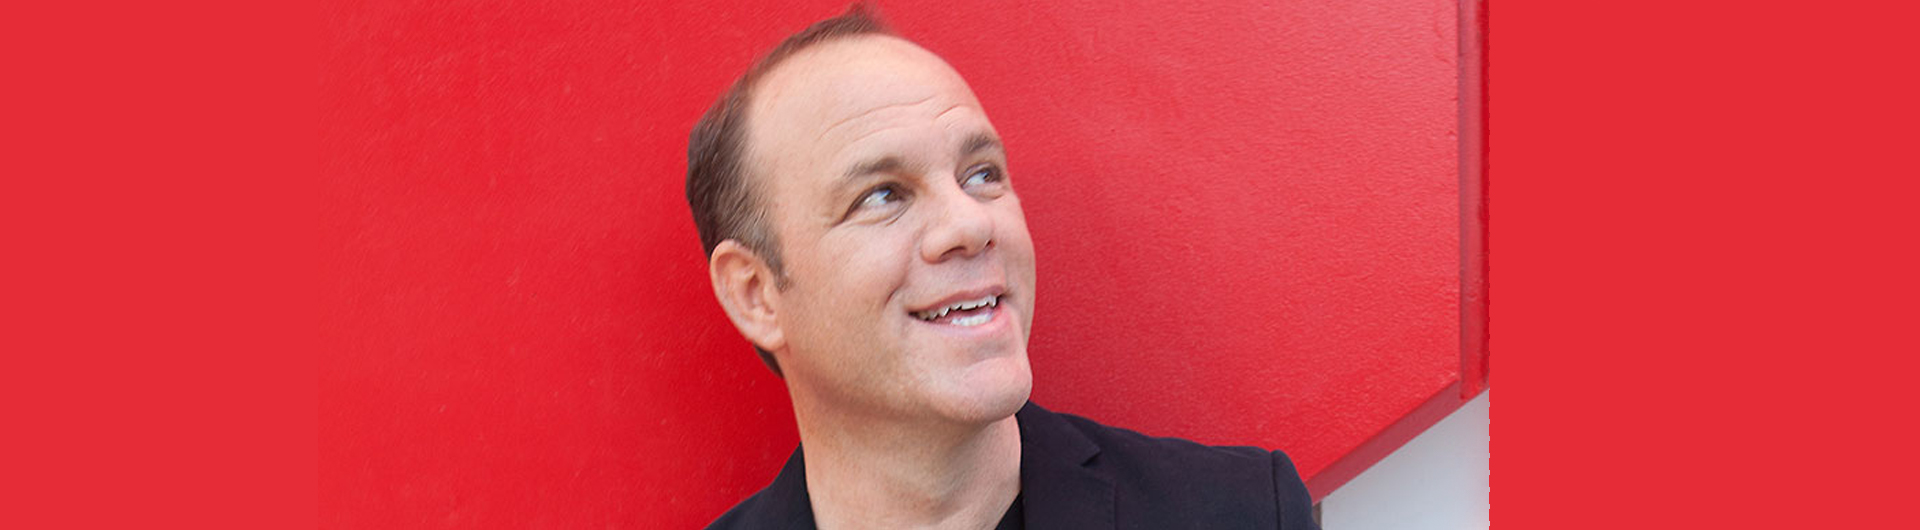 Photo of Tom Papa looking to upper right